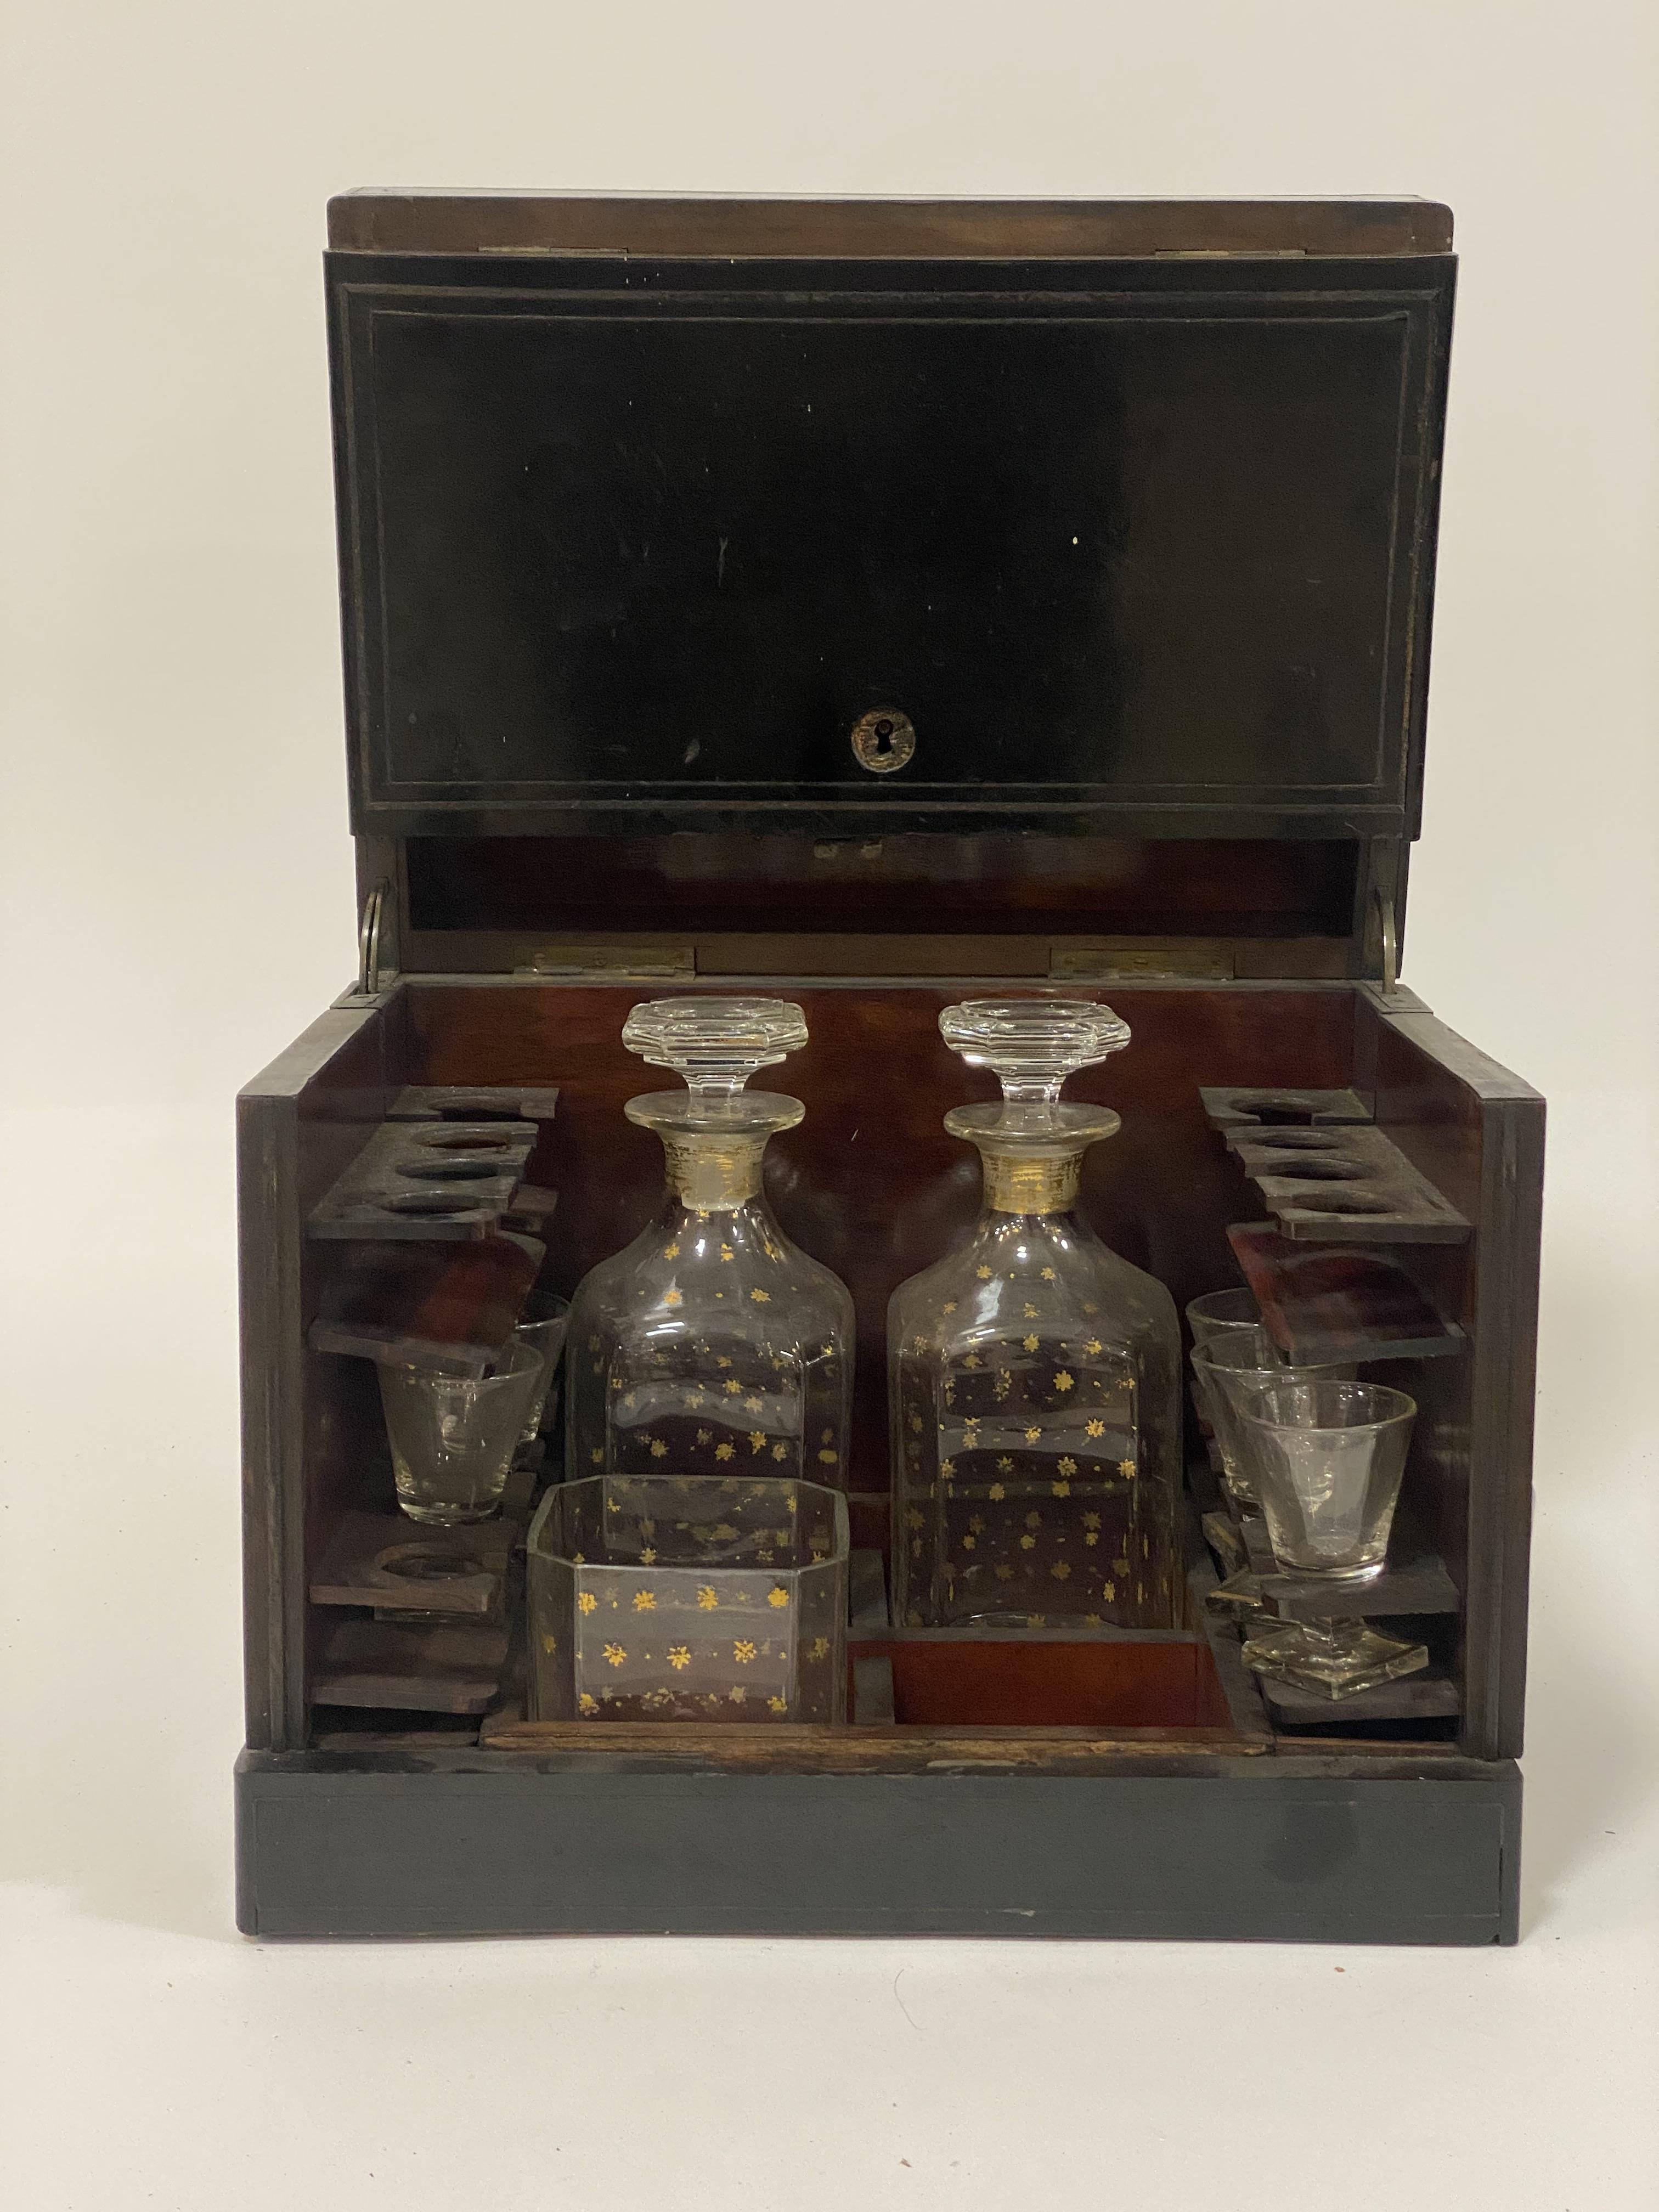 A mid19th century ebonised tantalus or drinks casket, the hinged lid enclosing a simulated - Image 3 of 3